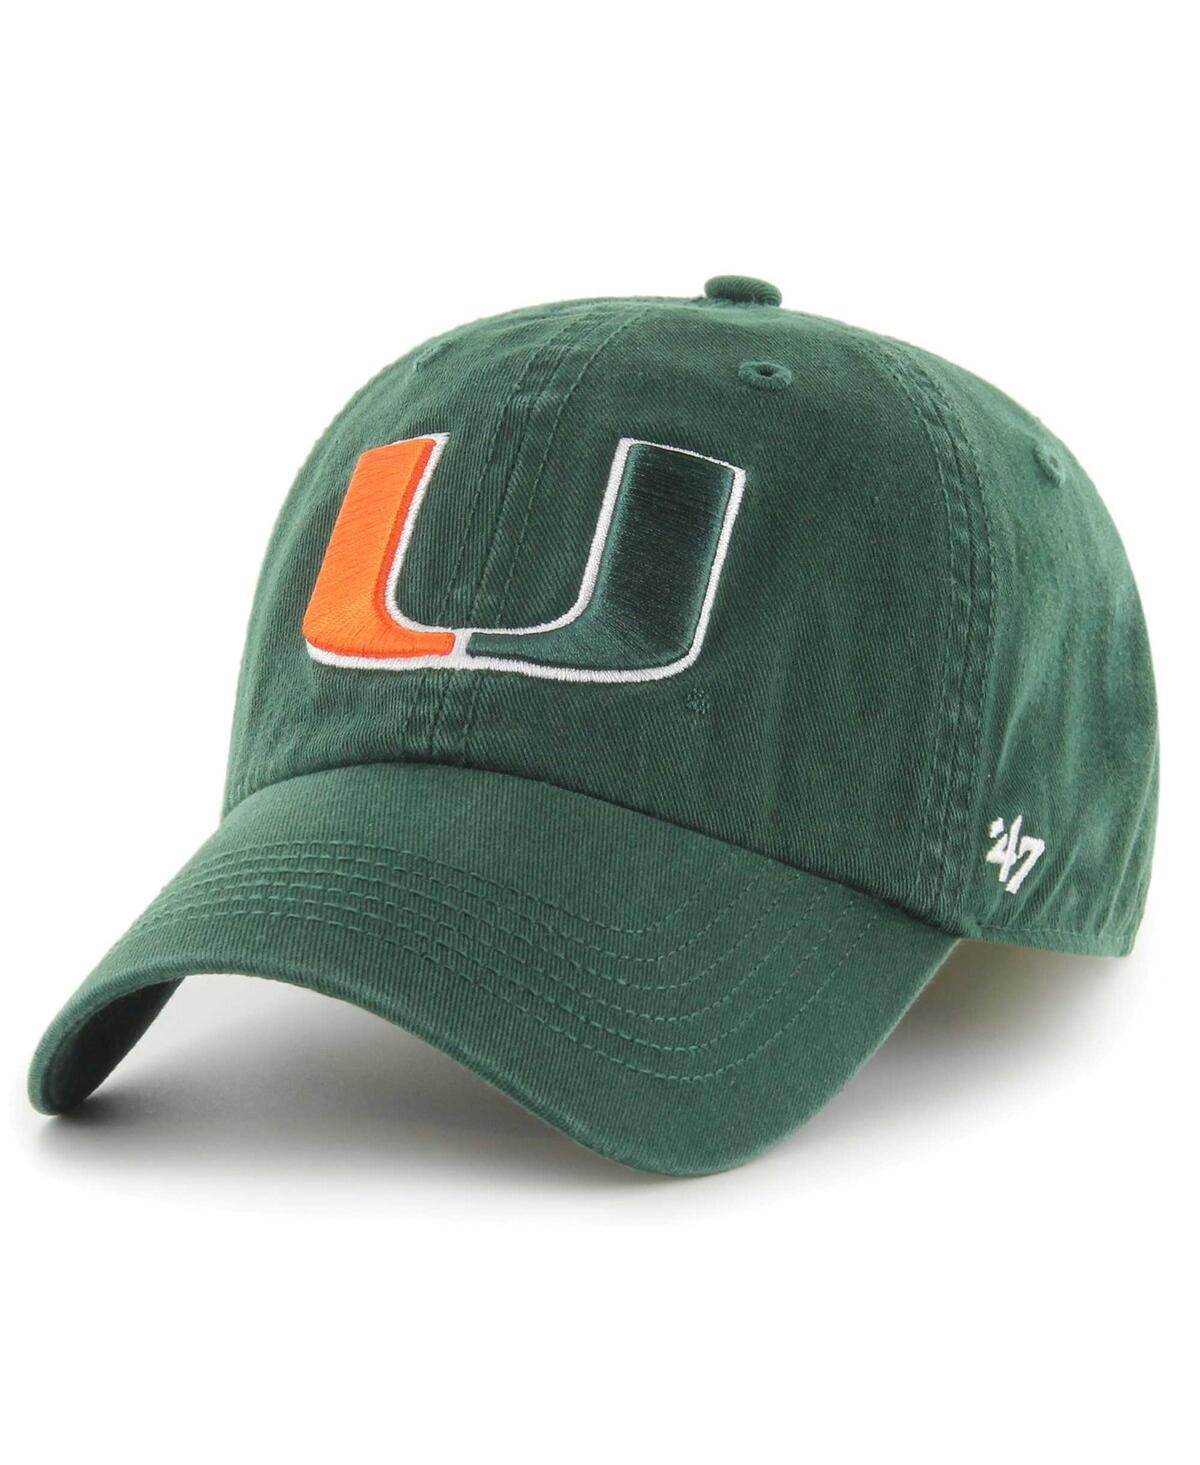 47 Brand Men's ' Green Miami Hurricanes Franchise Fitted Hat